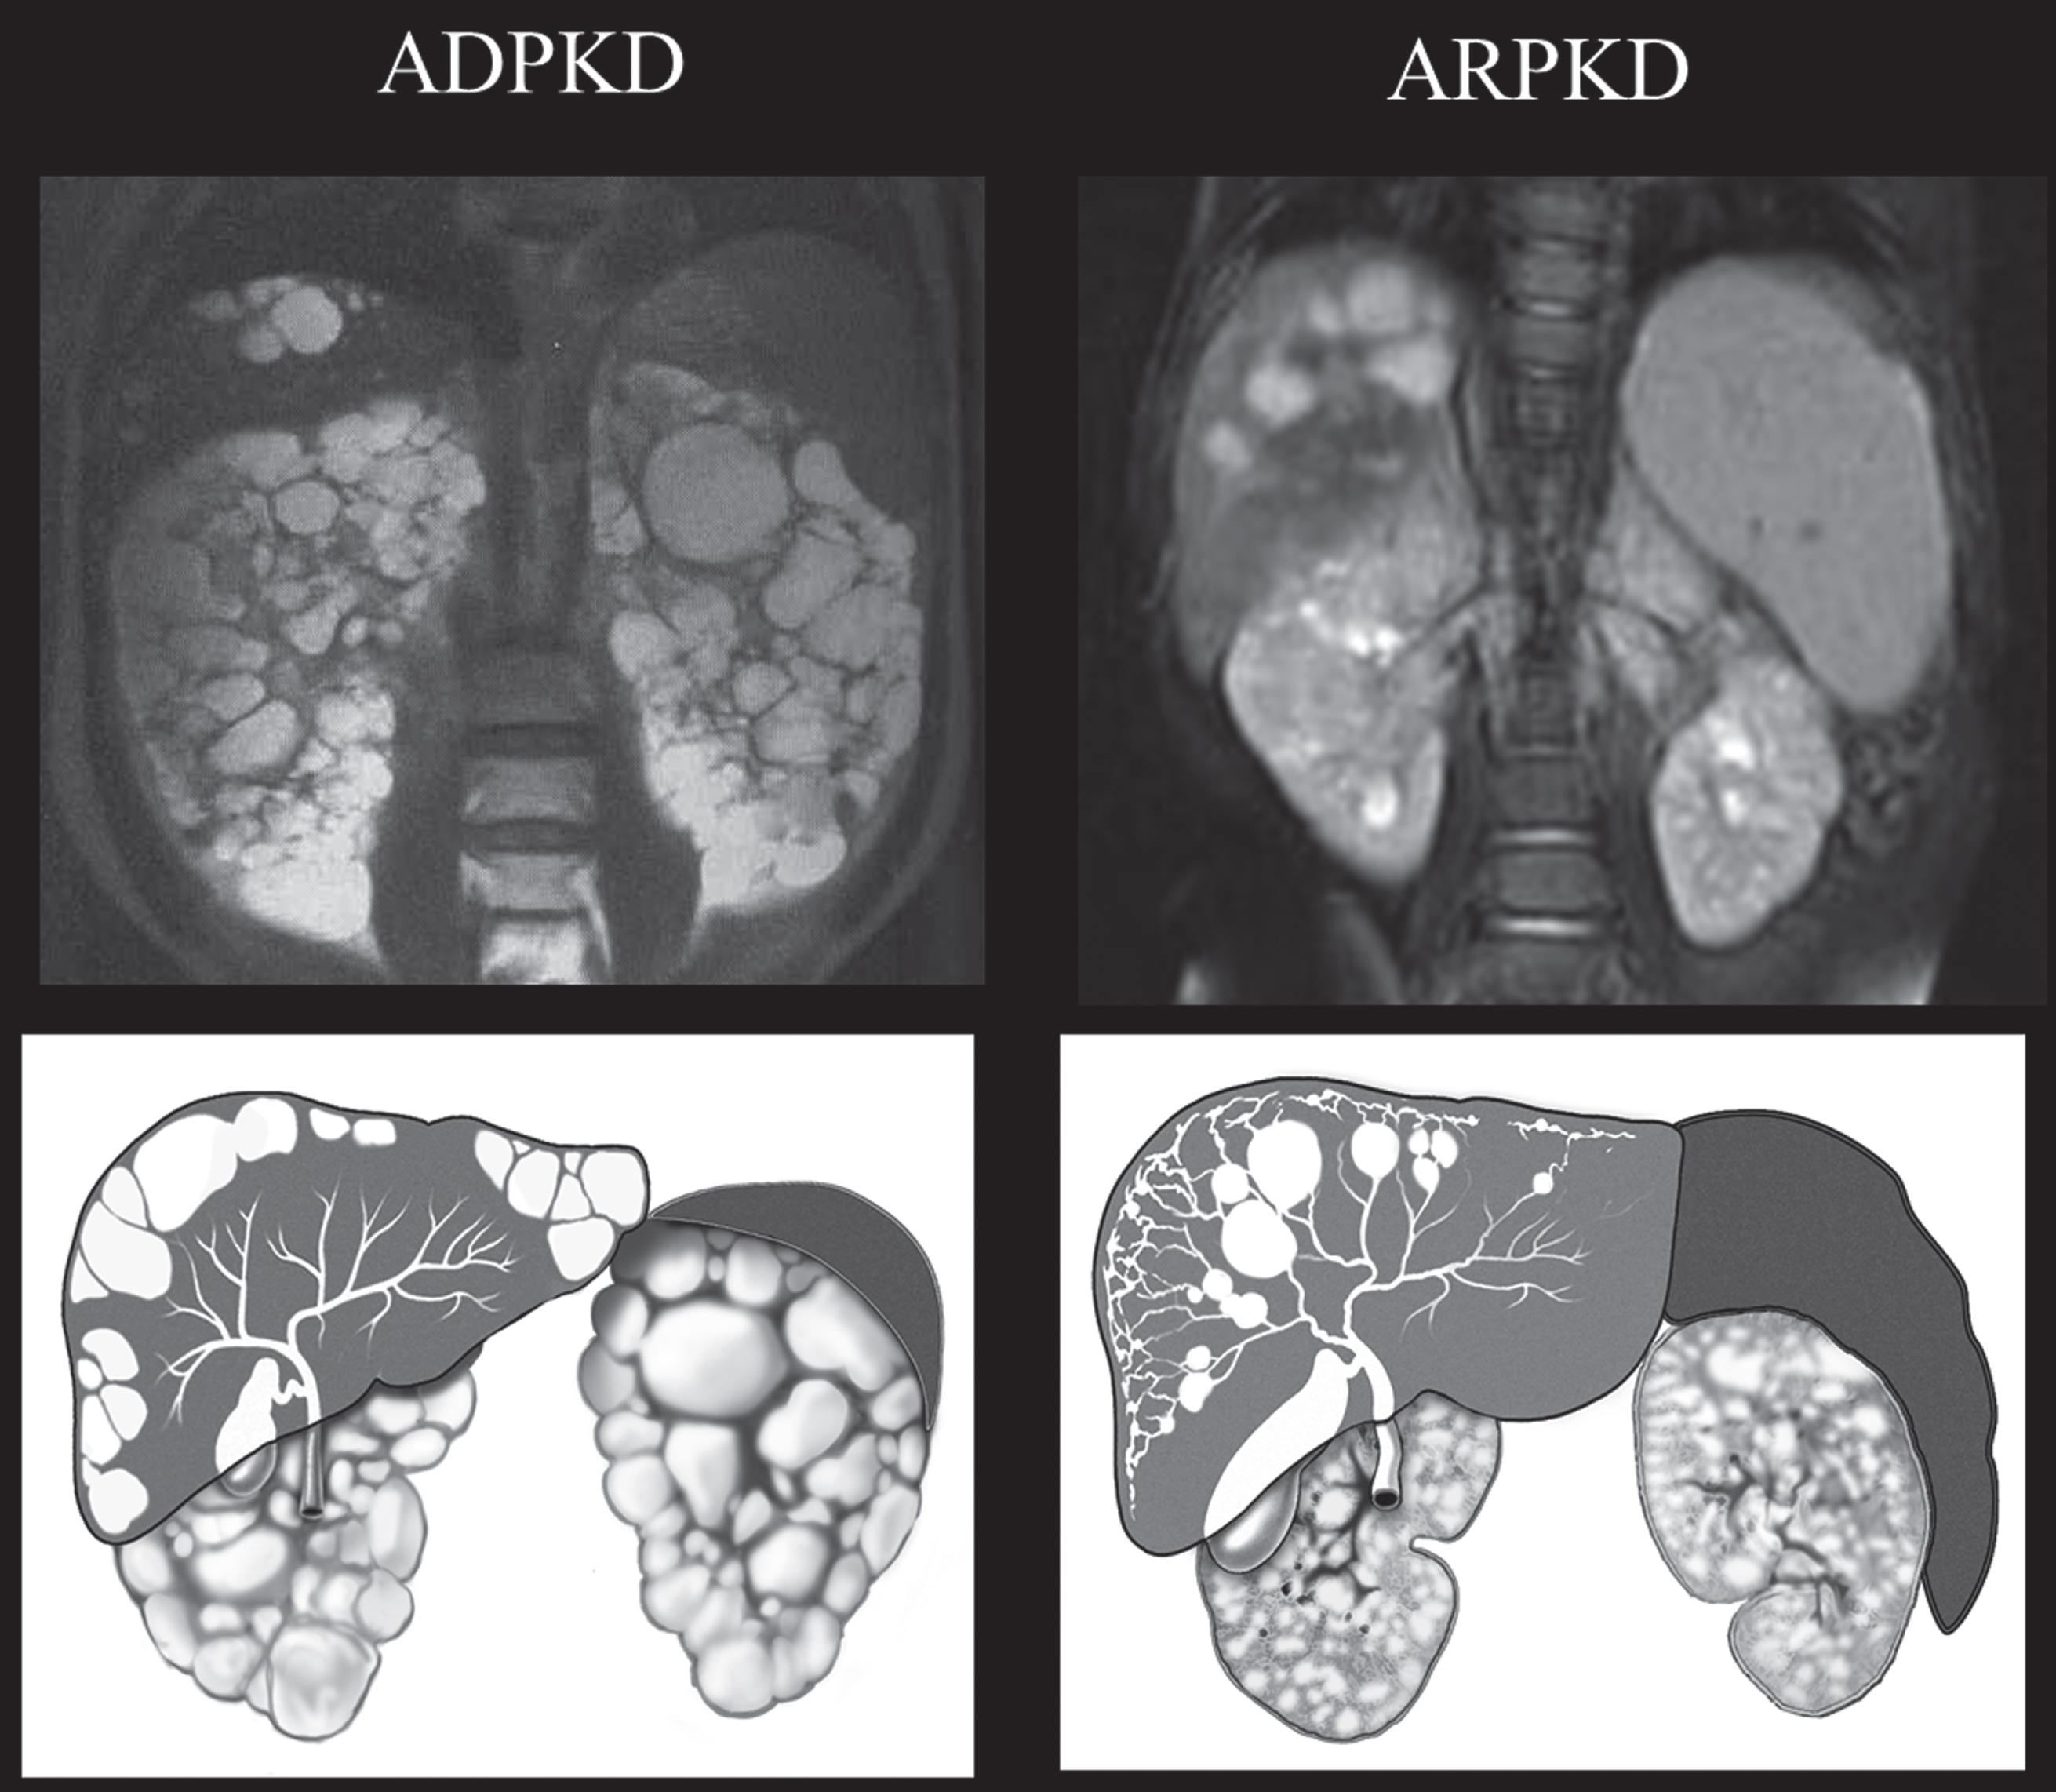 Drawings and MRI images of kidneys, liver, and spleen in ADPKD and ARPKD. In ADPKD portal hypertension is not typical. Therefore, the spleen is not enlarged. Liver cysts in ADPKD are isolated cysts that are not contiguous with the biliary tree. ADPKD kidneys often have distorted contours due to macrocysts. In contrast, in ARPKD, kidneys preserve their reniform contour. CHF in ARPKD is often complicated by portal hypertension evidenced by the enlarged spleen on the MRI. Seventy percent of ARPKD patients also have dilatations of the intra- and extra-hepatic biliary system. (ADPKD MRI is from Heptinstall’s pathology of the kidney, Ed: Jennette J., Olson J., Schwartz M., Silva F.)